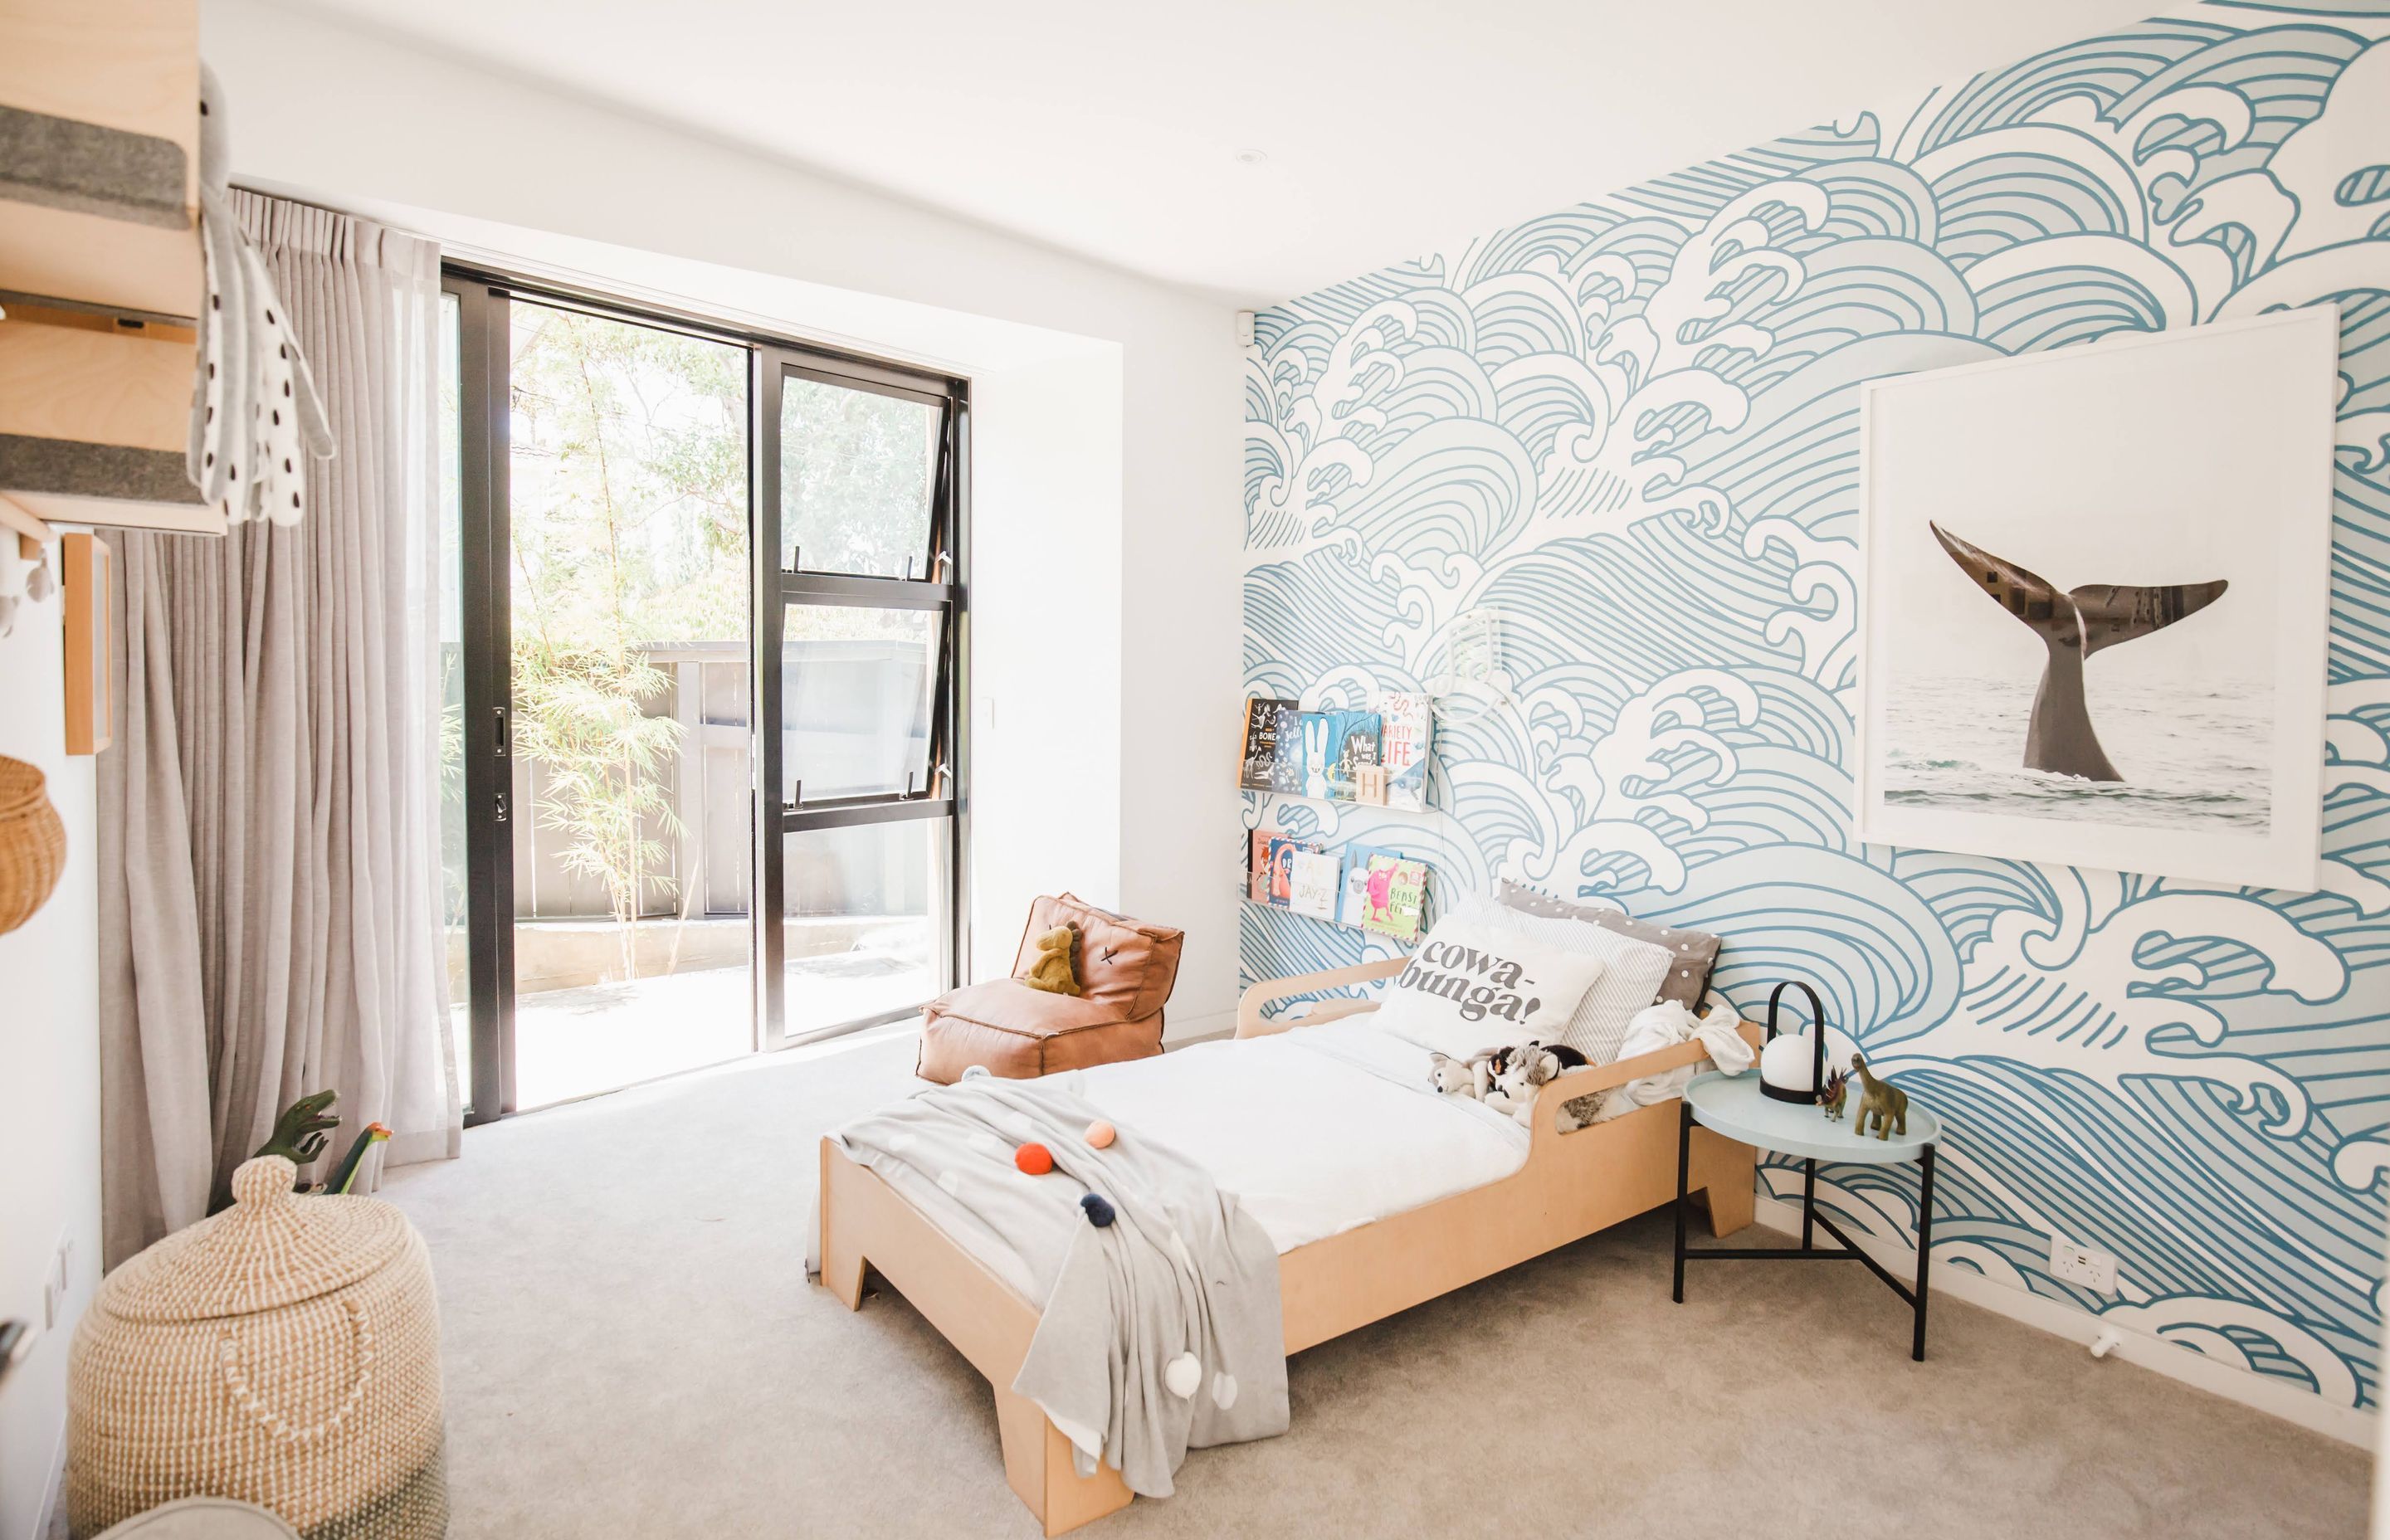 Ocean-themed wallpaper and the Plyhome Junior Bed by Plyhome are a perfect combination in the youngest son's bedroom.